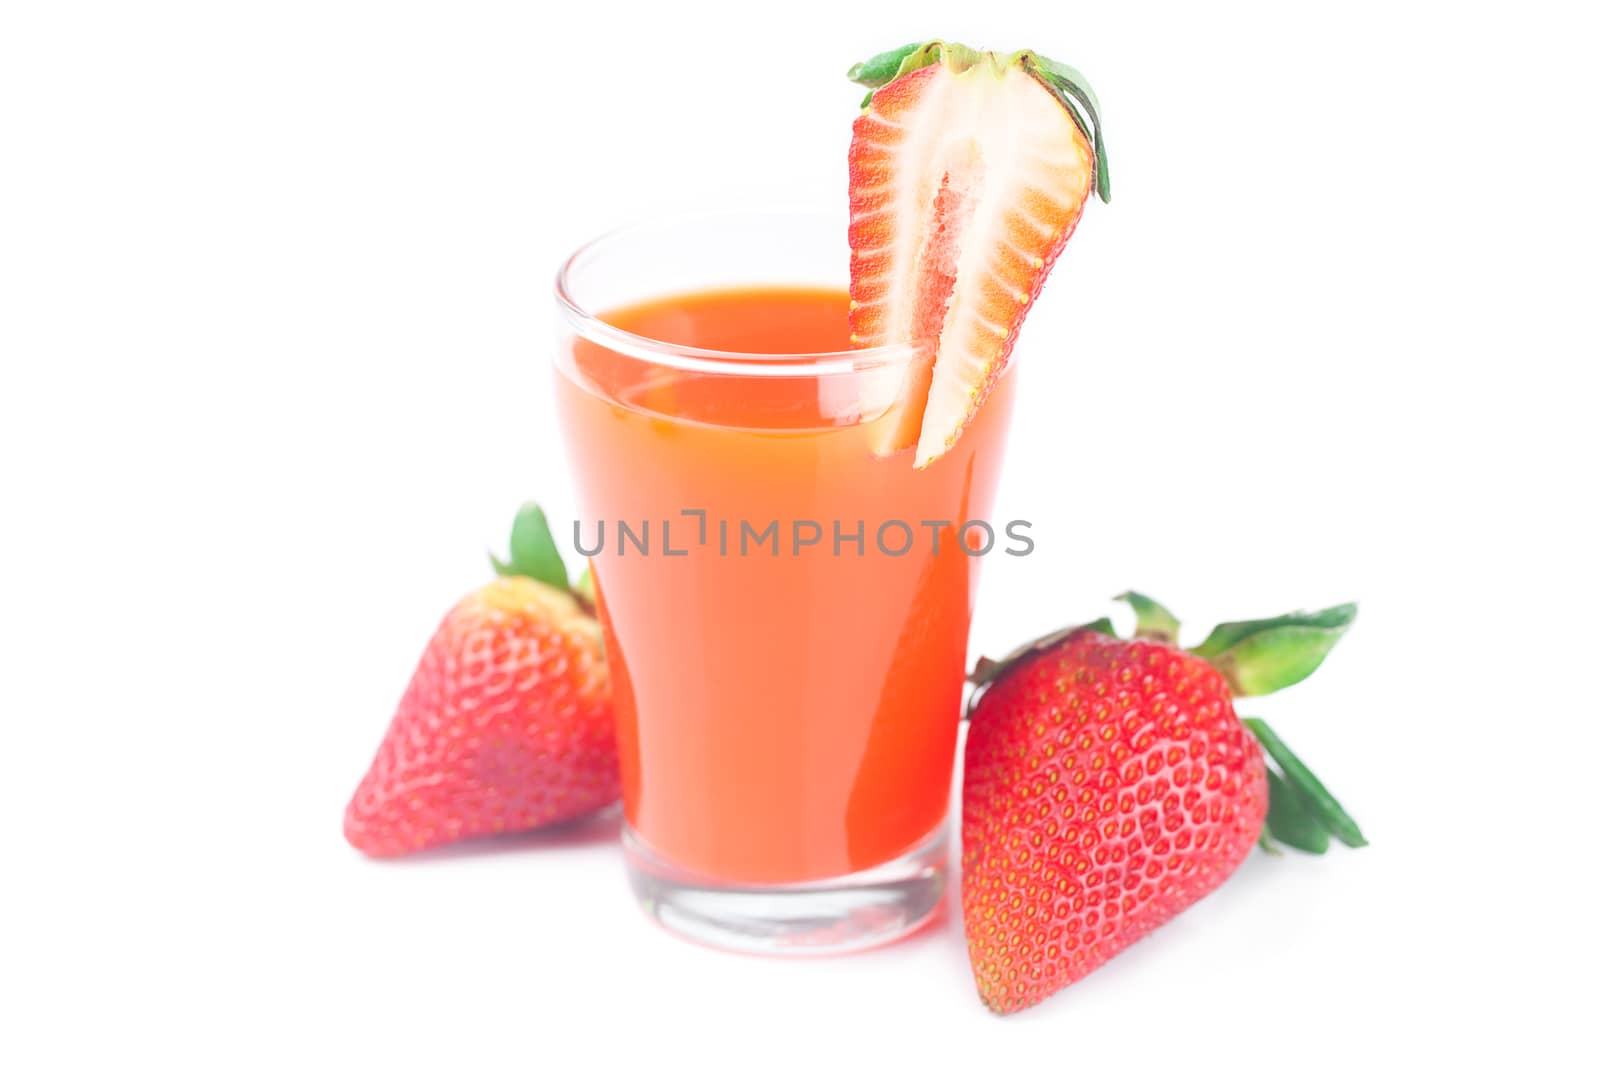 strawberry and a glass of strawberry juice isolated on white